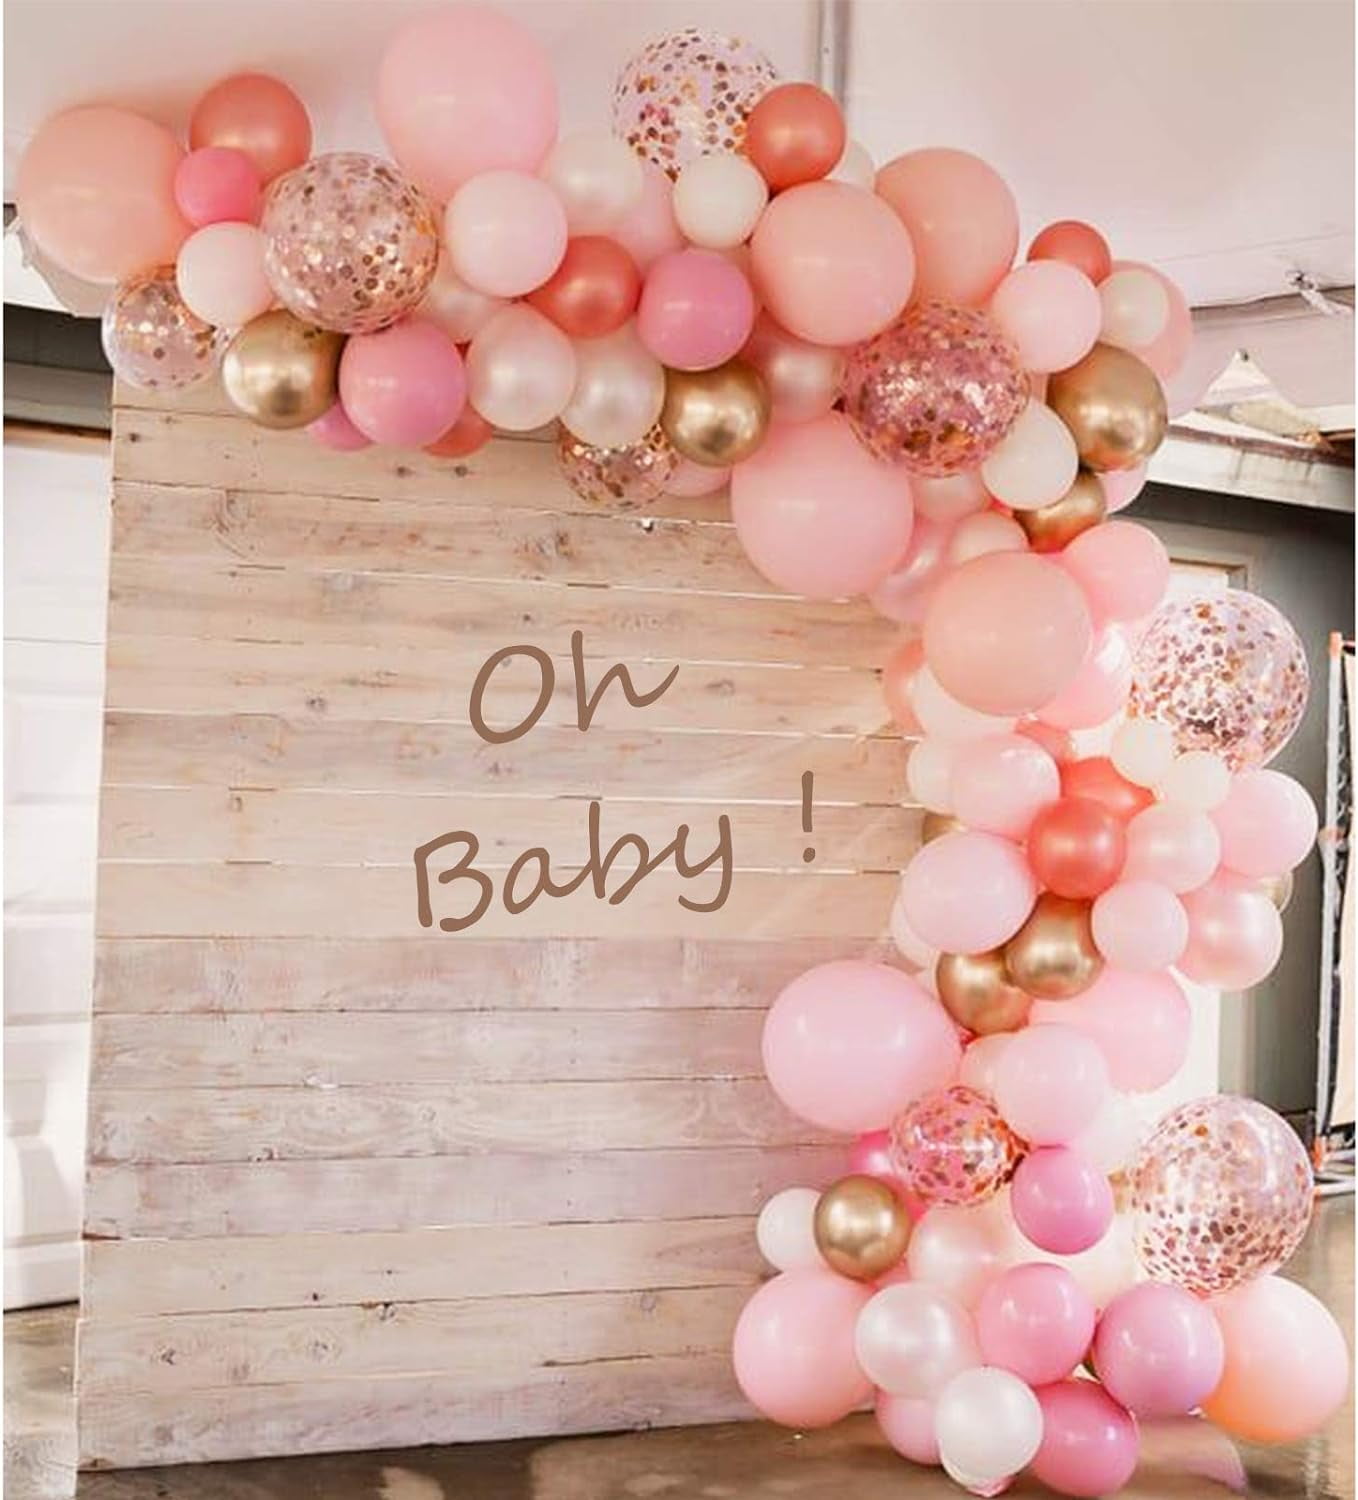 EBD Products Hot Pink Balloons Assorted Black Gold Pink Party Decorations for Bachelorette Bridal Baby Shower Wom SEA8189756